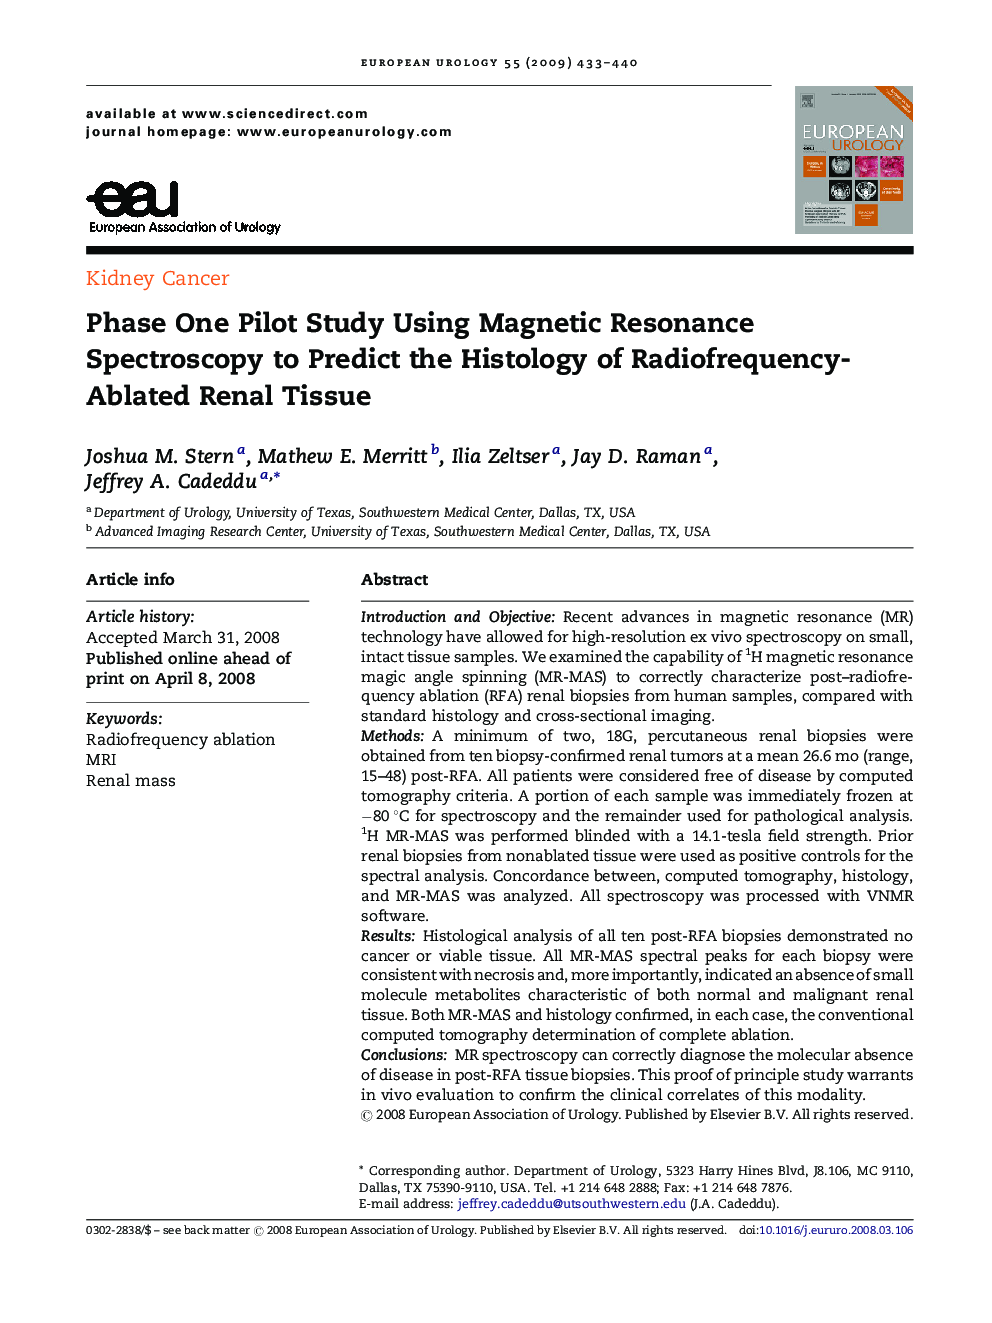 Phase One Pilot Study Using Magnetic Resonance Spectroscopy to Predict the Histology of Radiofrequency-Ablated Renal Tissue